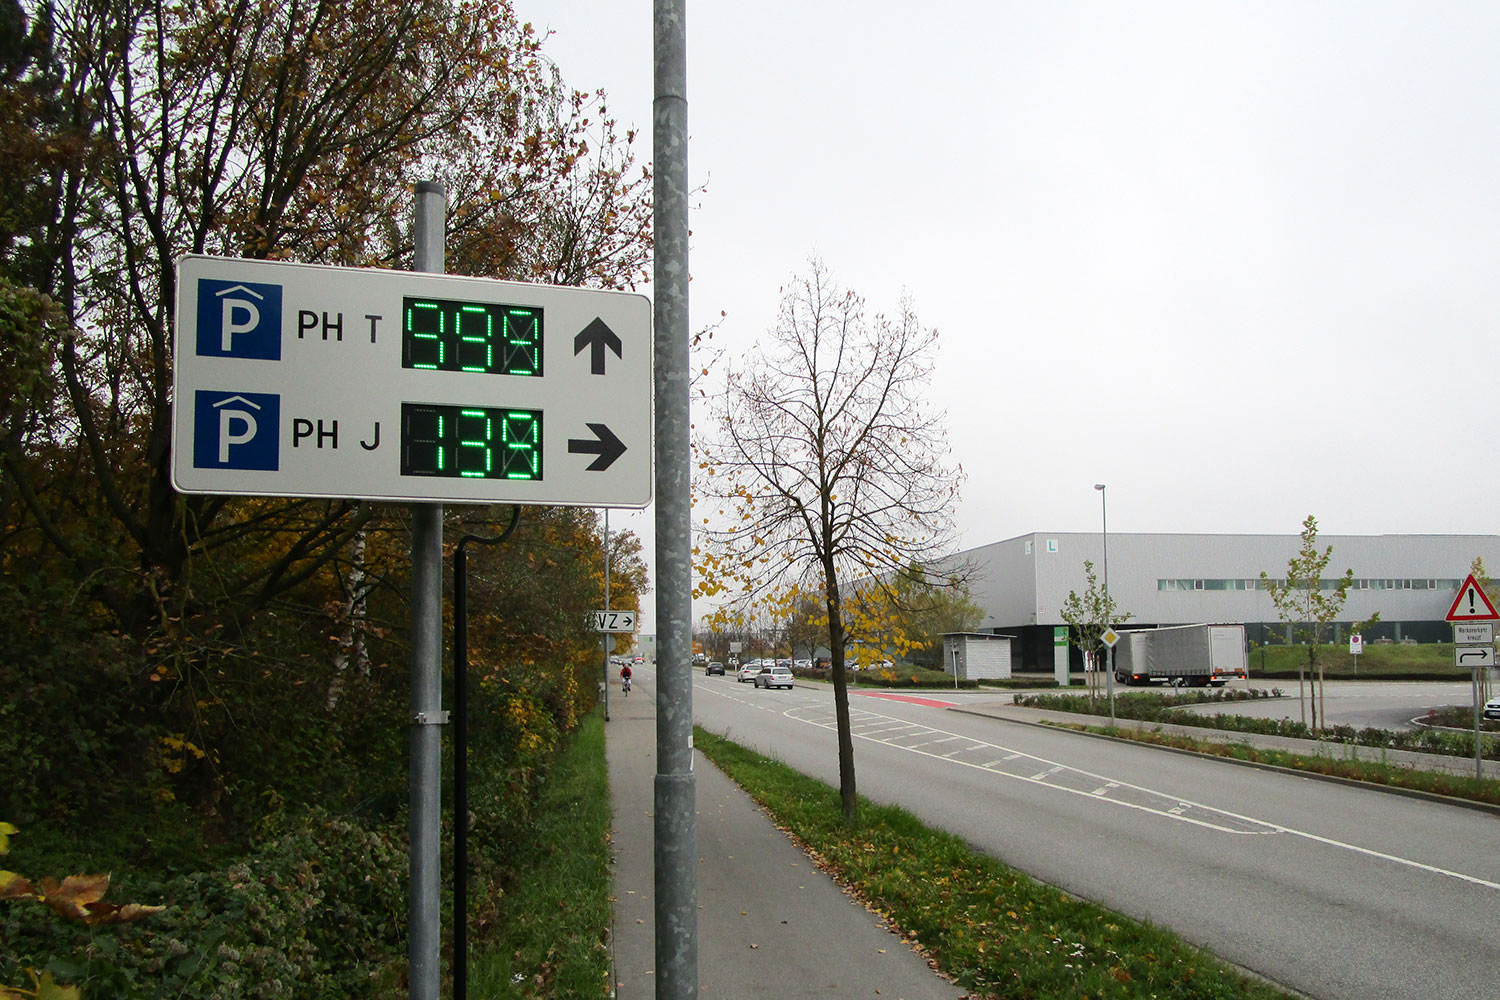 New parking guidance system for Audi in Ingolstadt